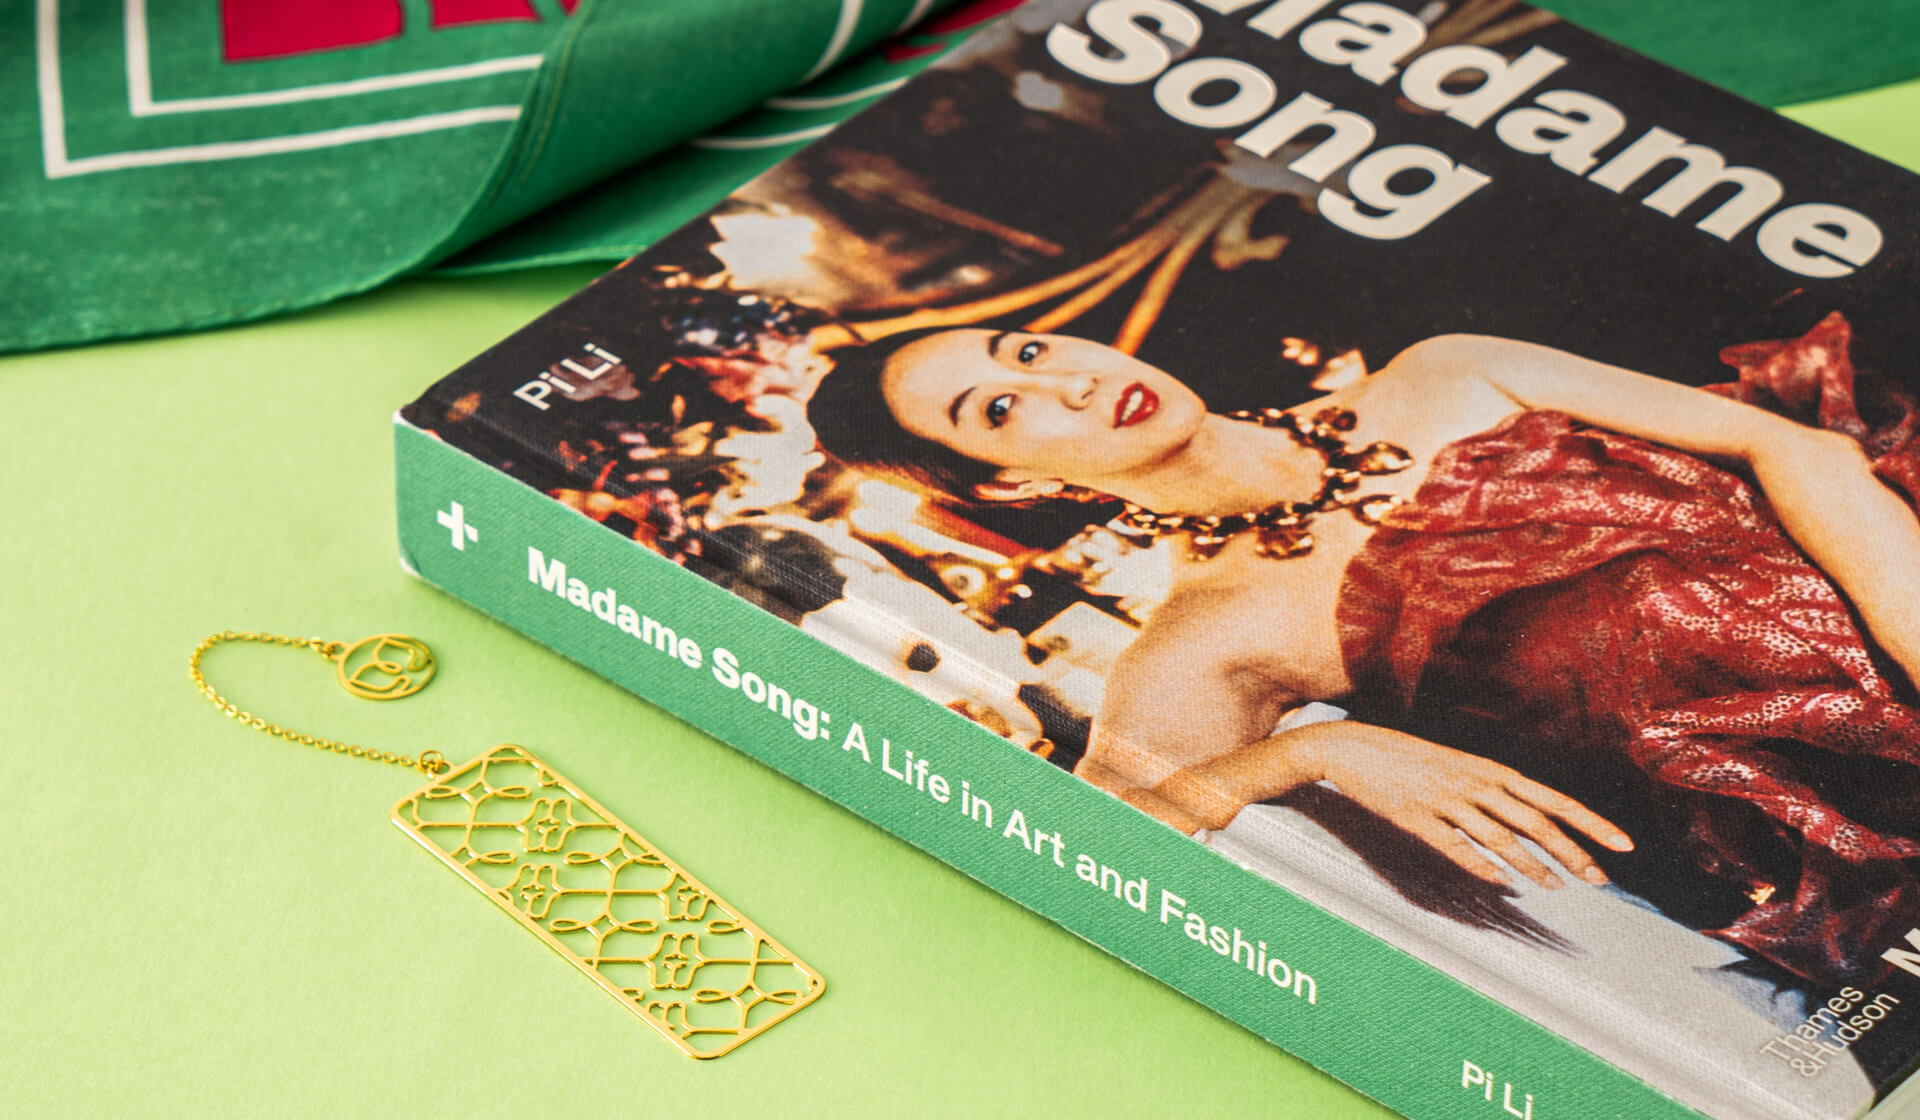 Complimentary Bookmark upon Purchase of <i>Madame Song: A Life in Art and Fashion